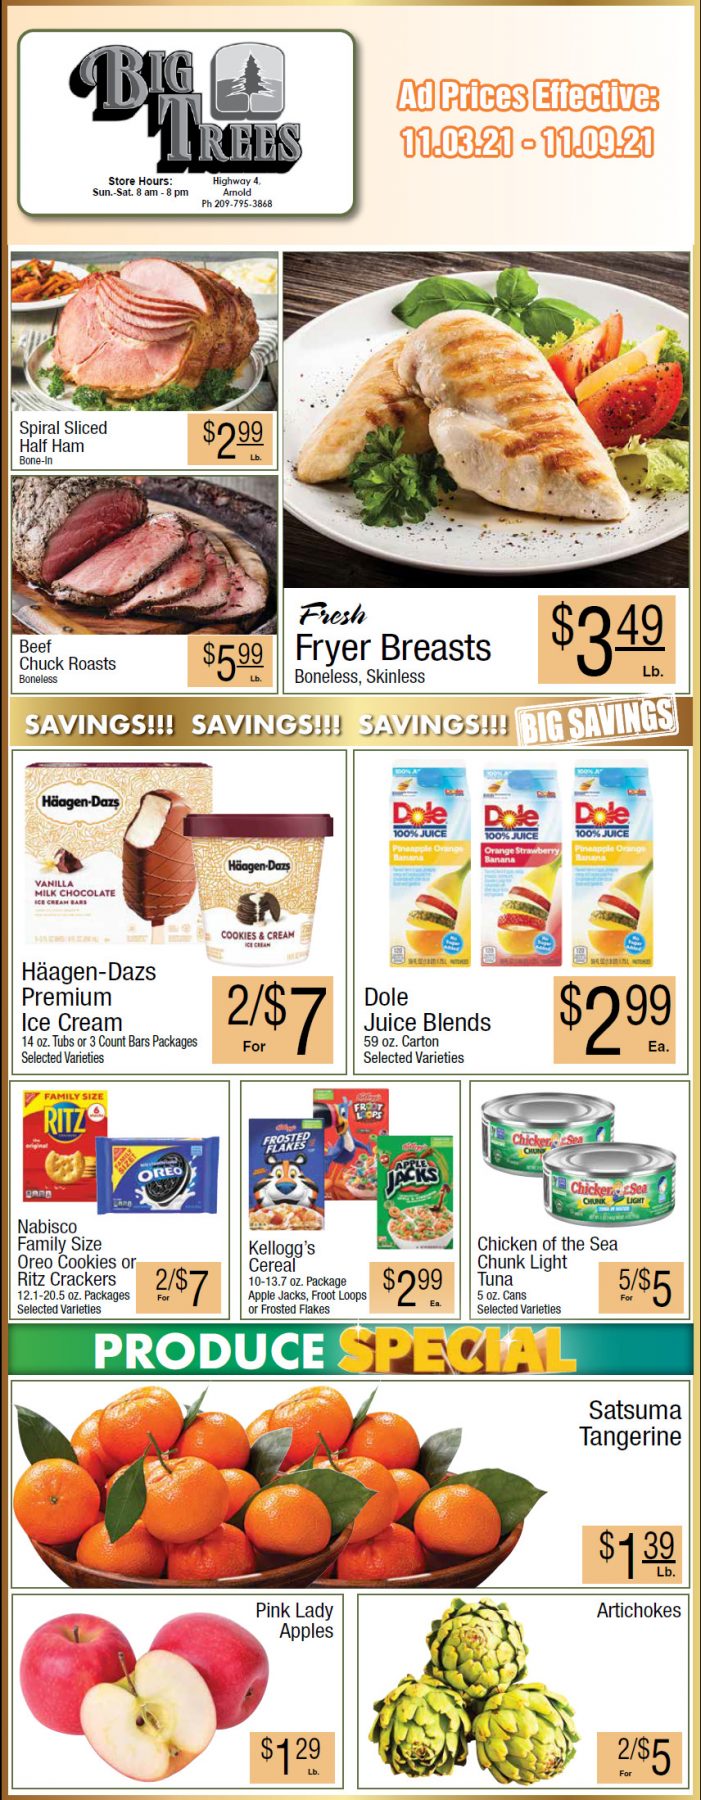 Big Trees Market Weekly Ad & Grocery Specials Through November 9th! Shop Local & Save!!